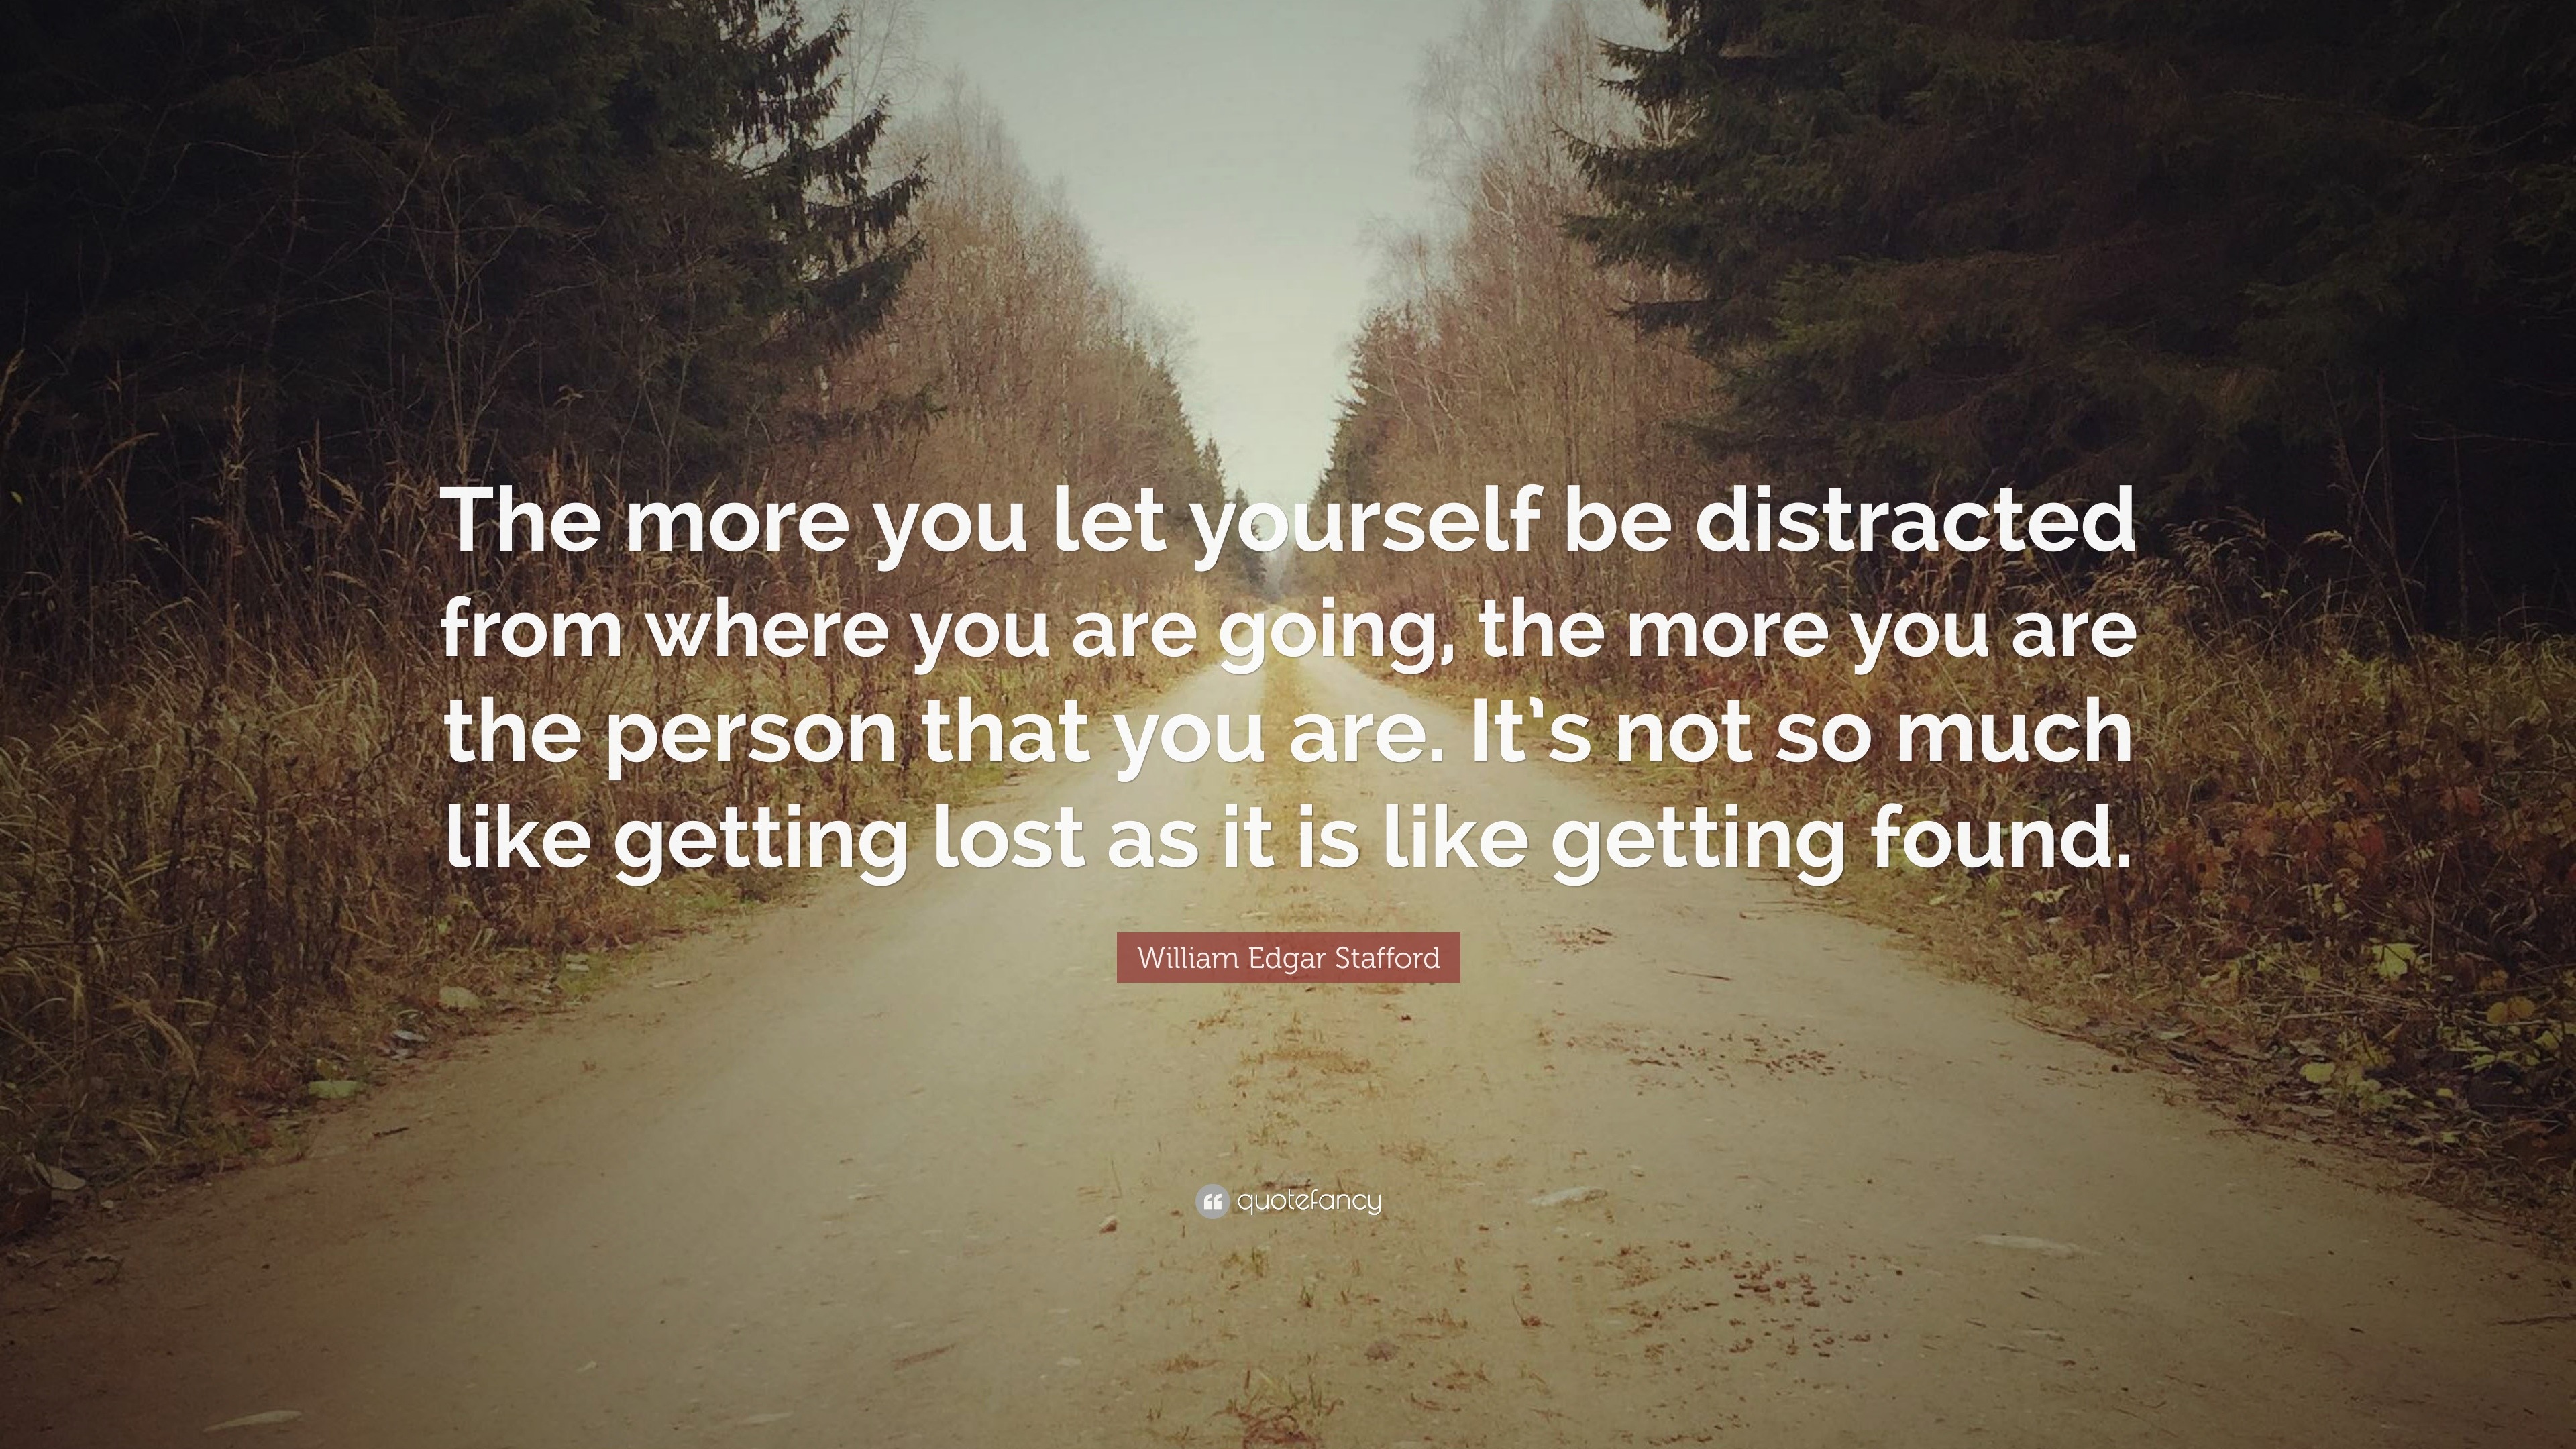 William Edgar Stafford Quote: “The more you let yourself be distracted ...